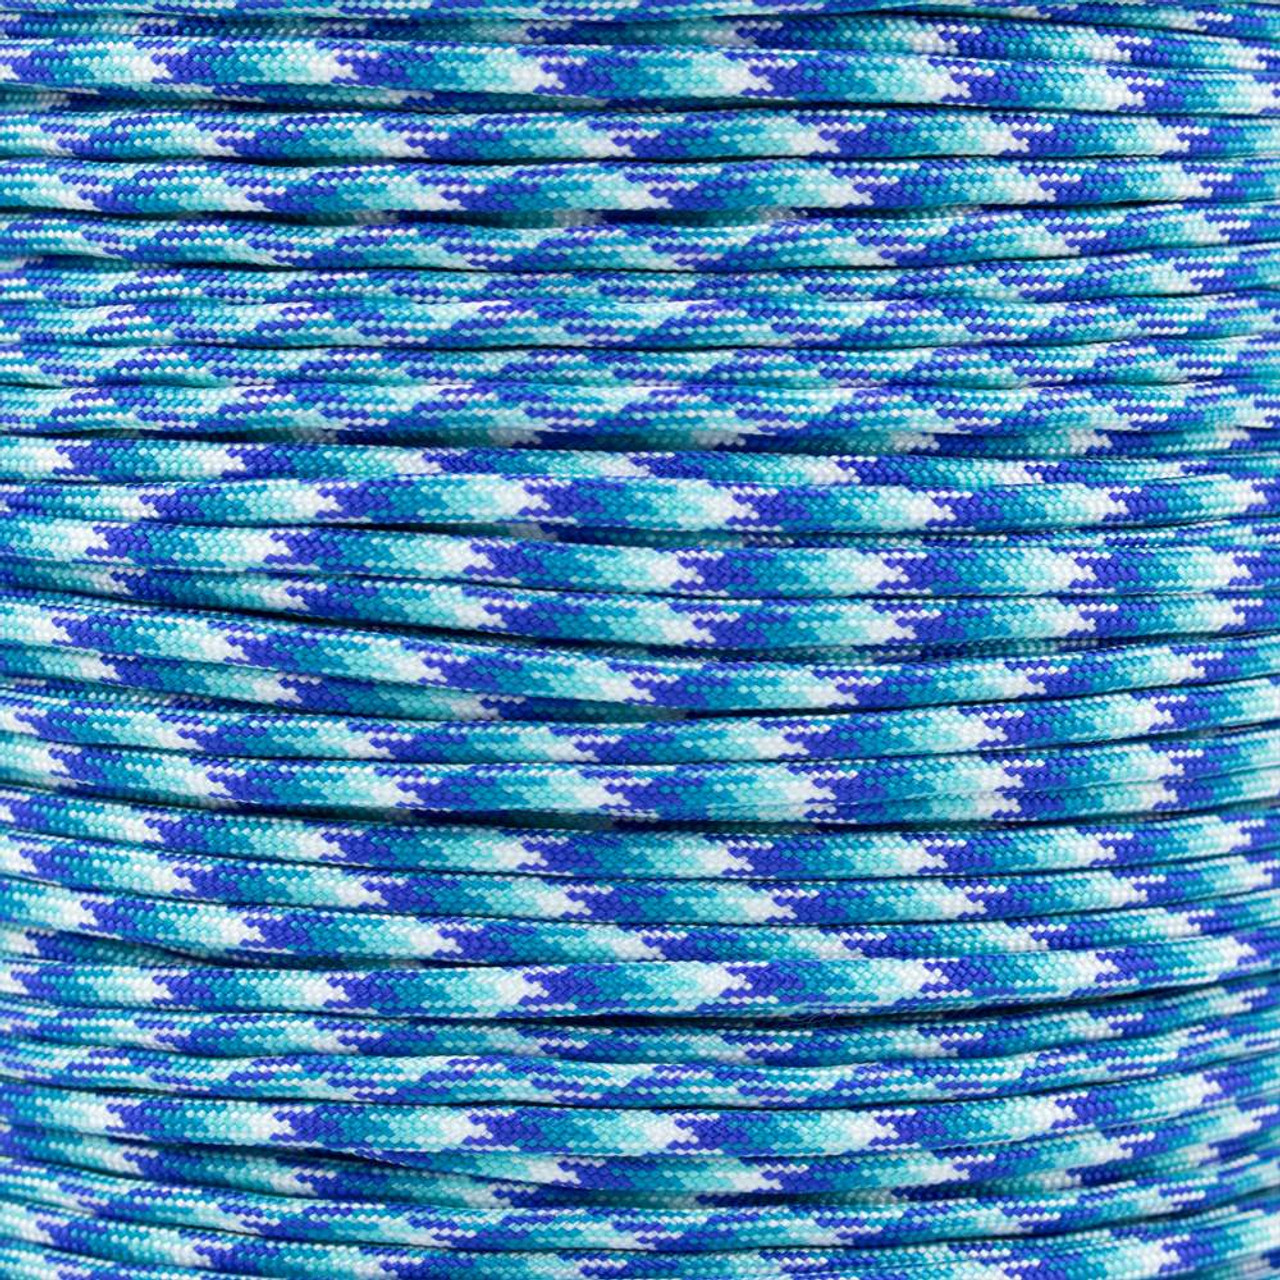 Darice Products - Paracord Planet